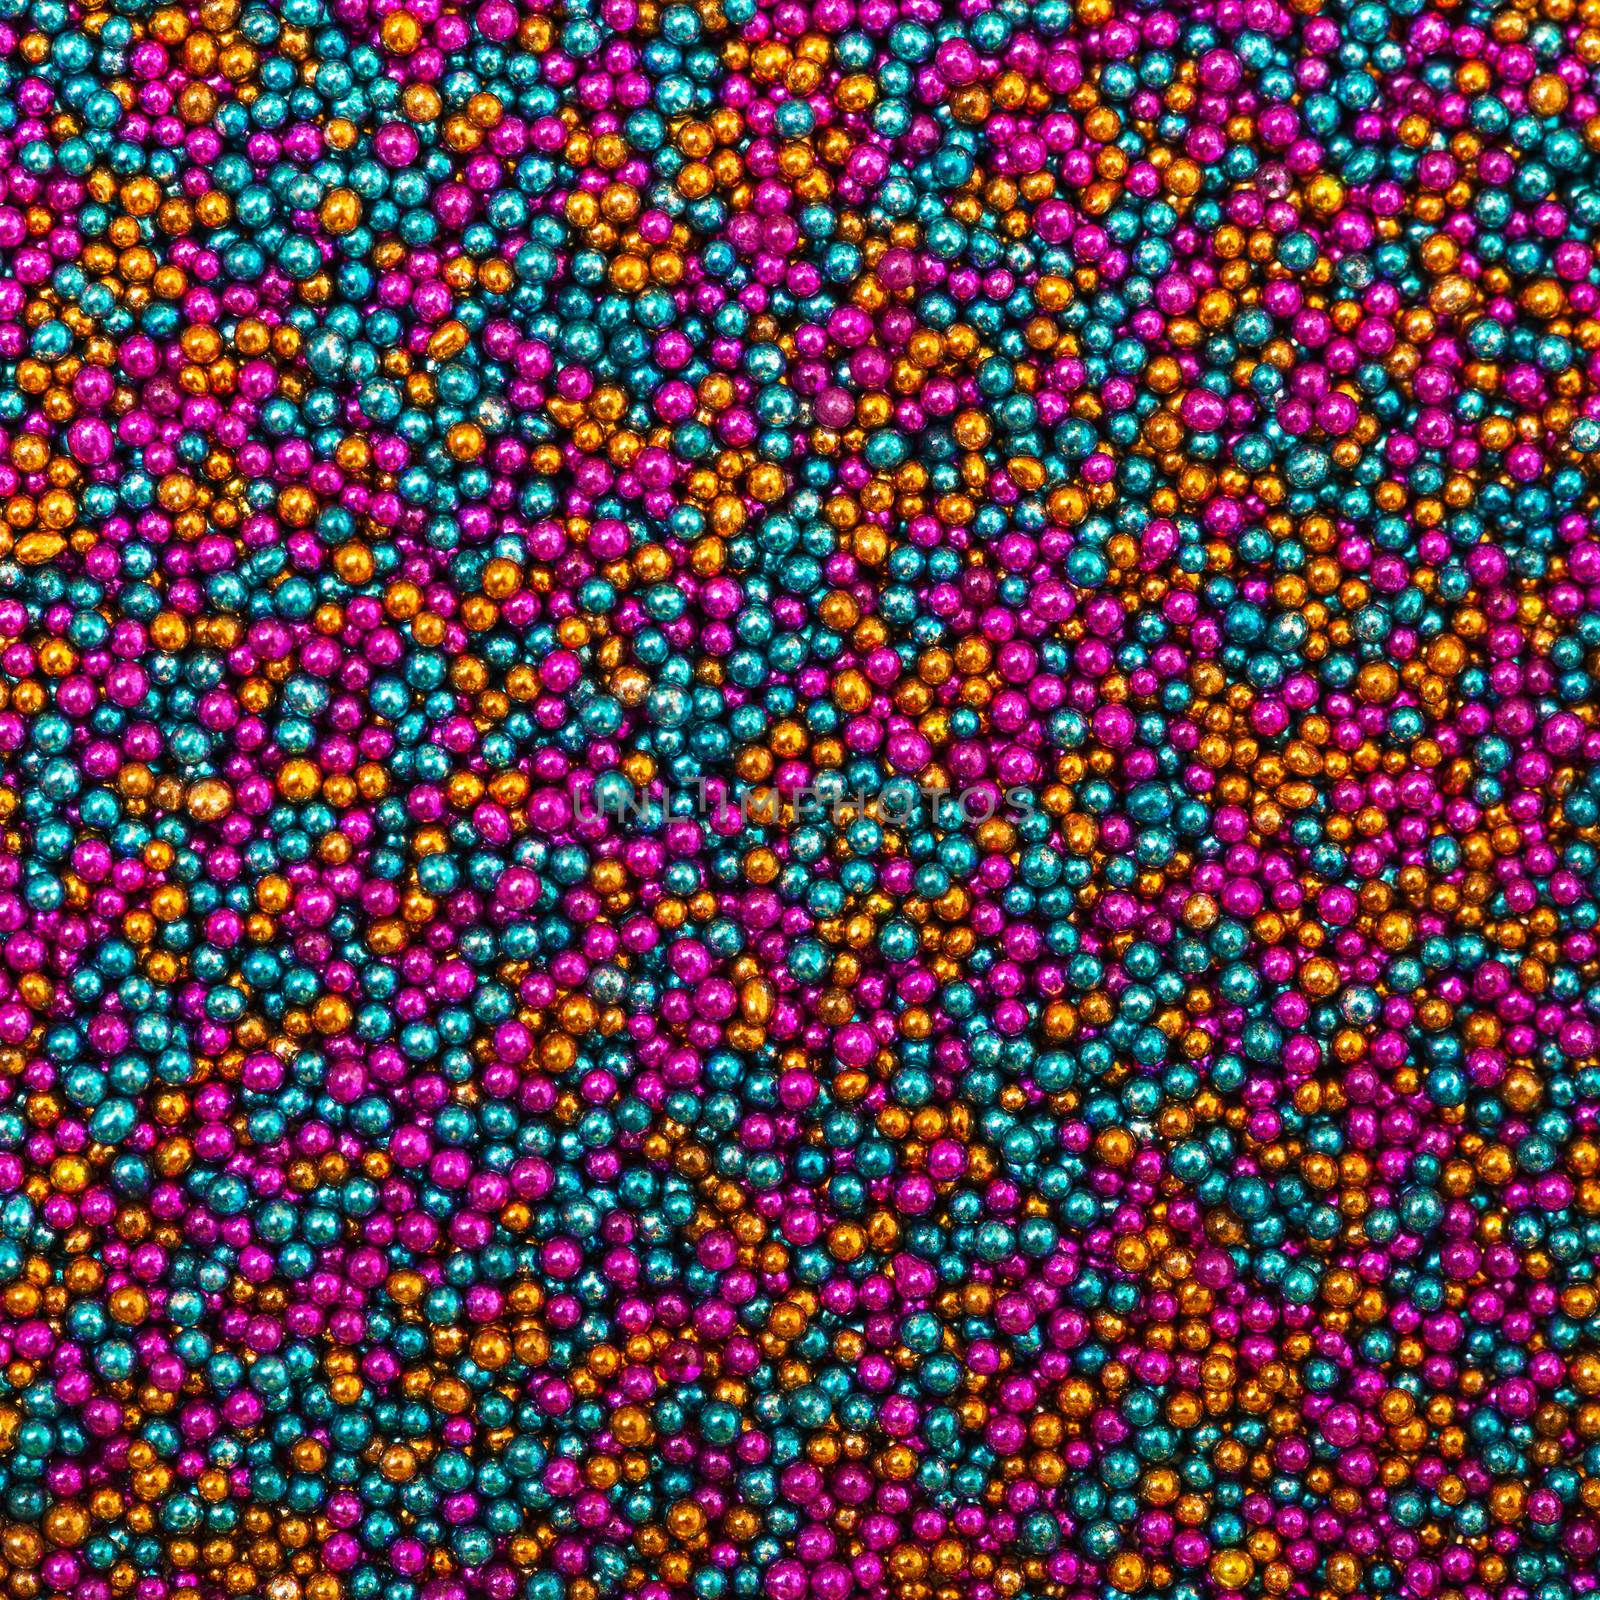 Background from Turquoise, Pink and Golden Balls of Bead by Discovod